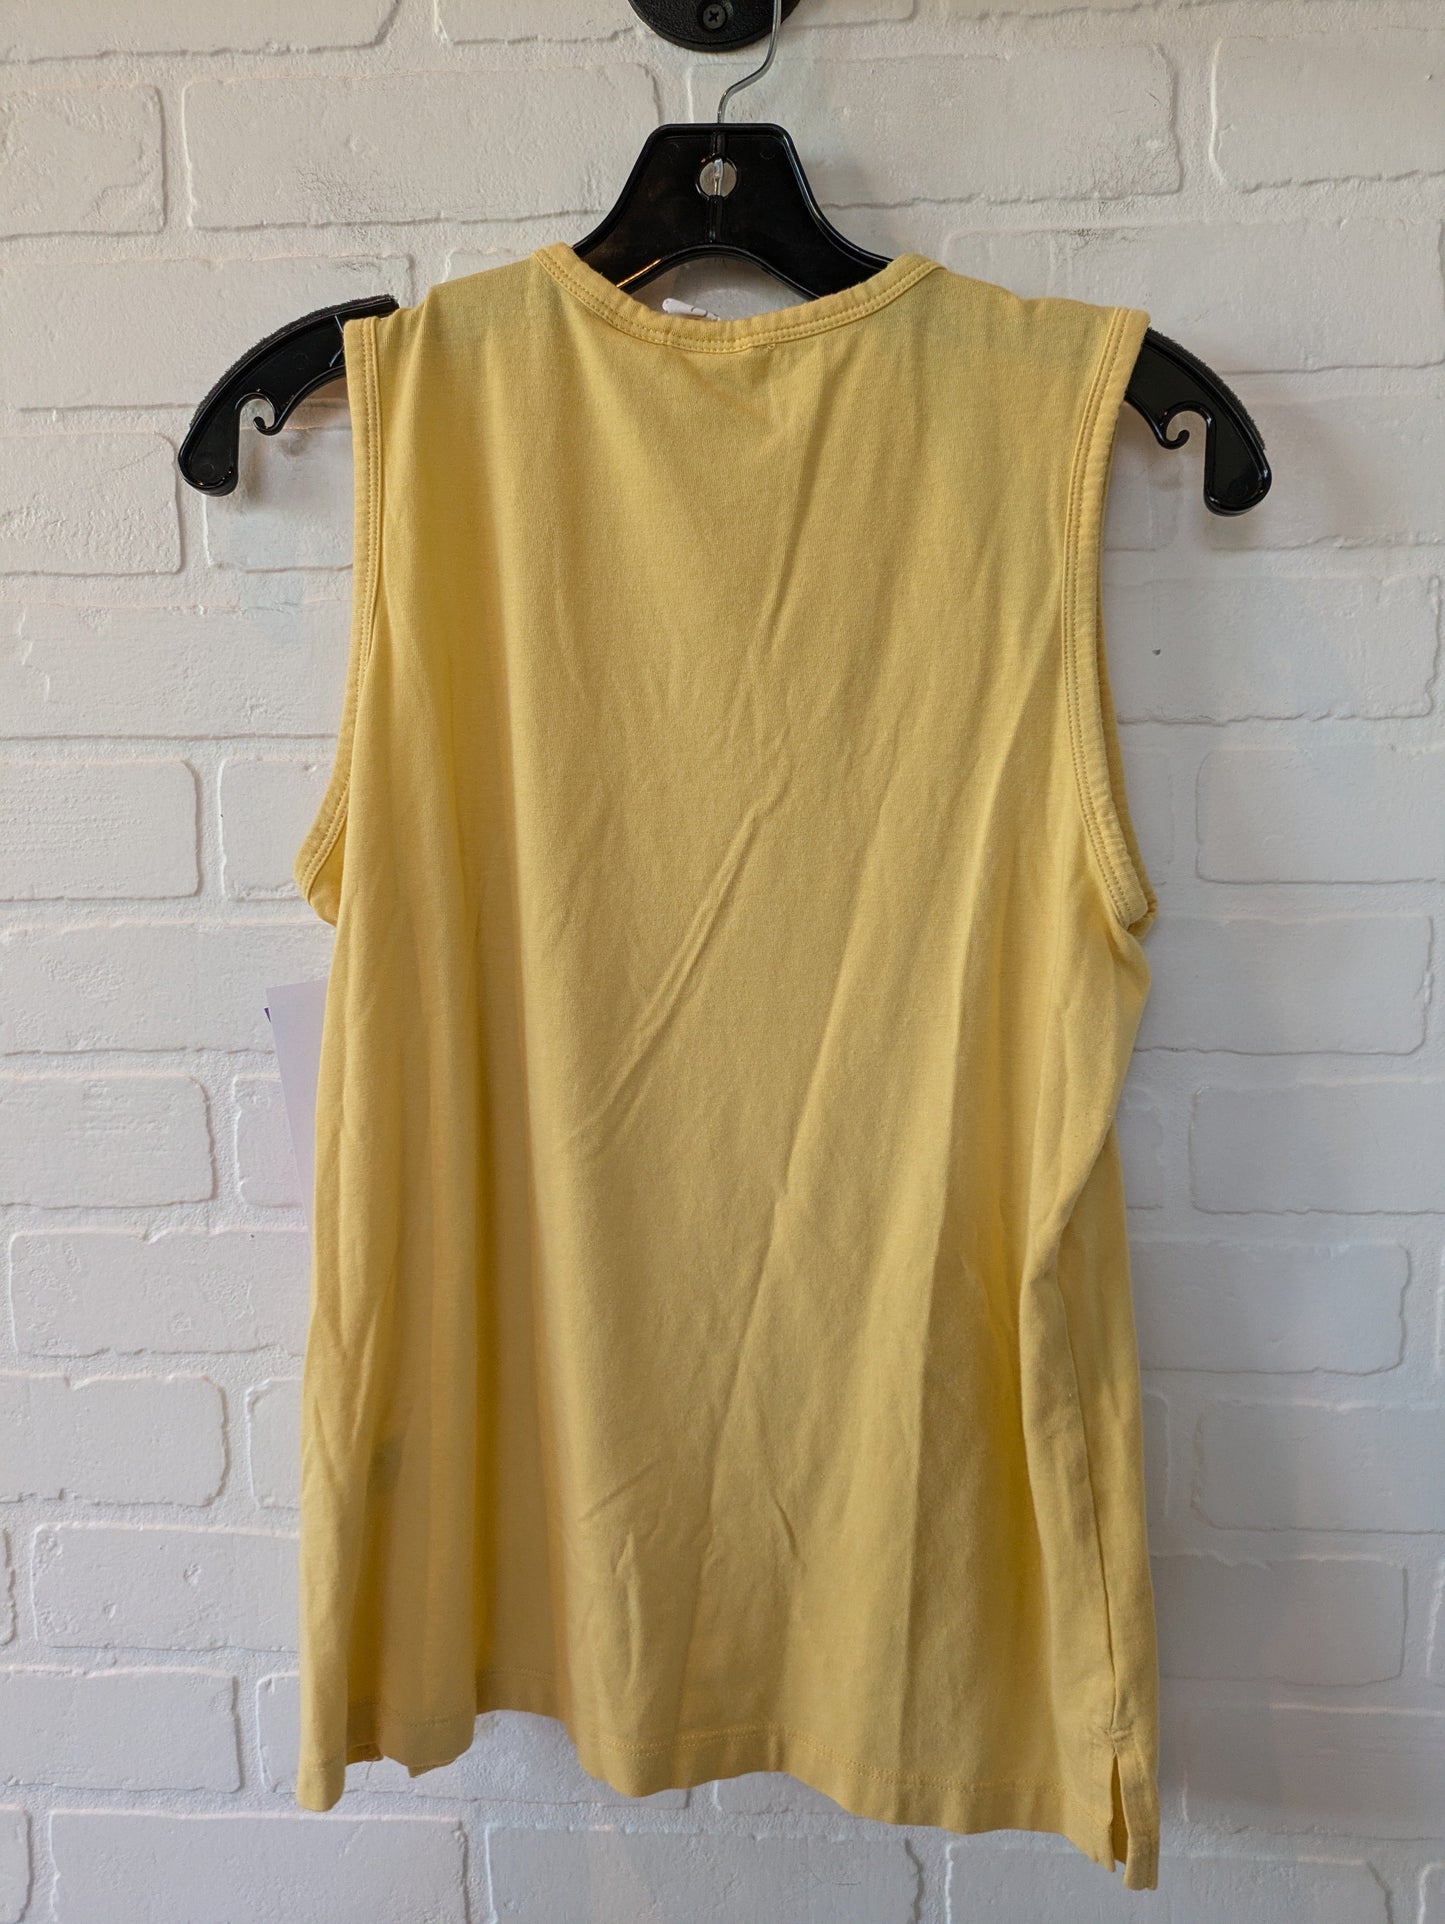 Yellow Top Sleeveless C And C, Size M